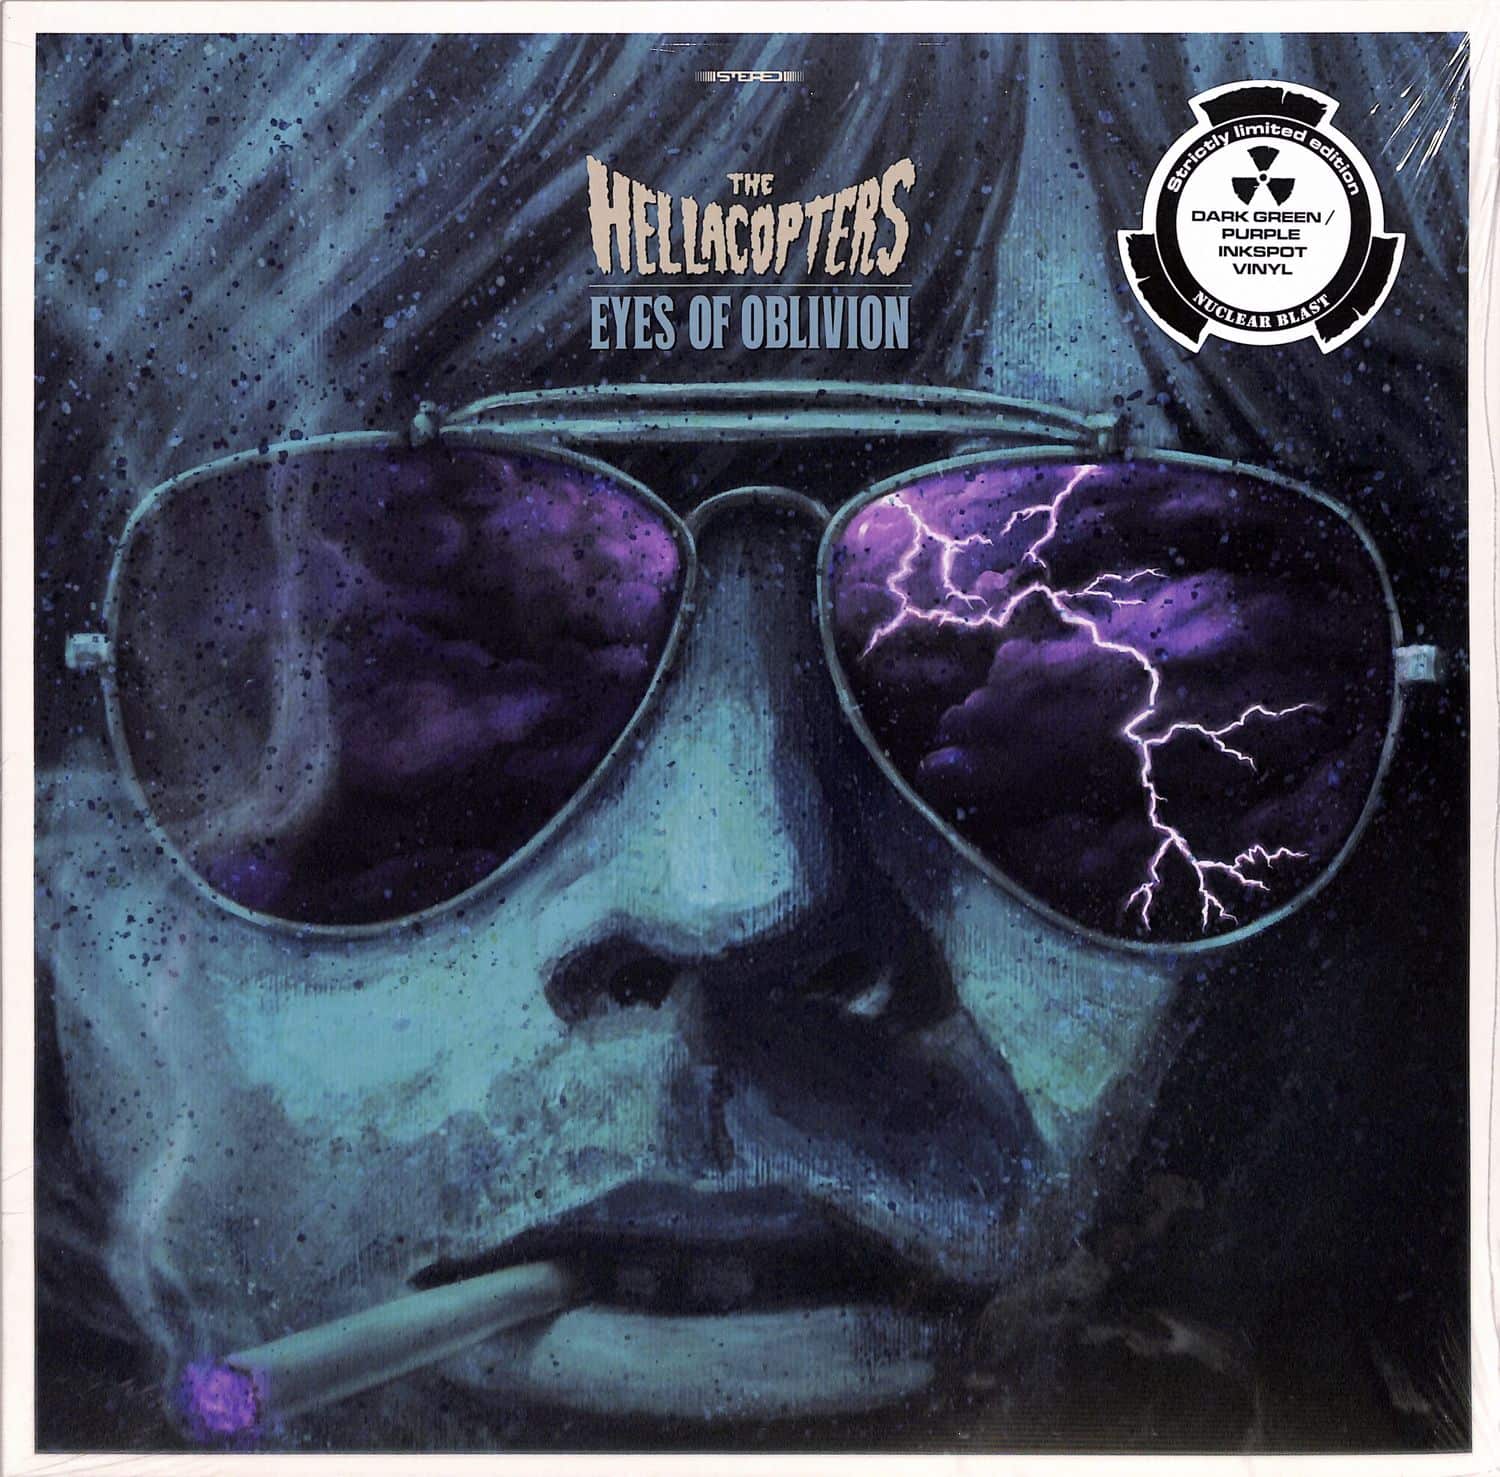 The Hellacopters - EYES OF OBLIVION 